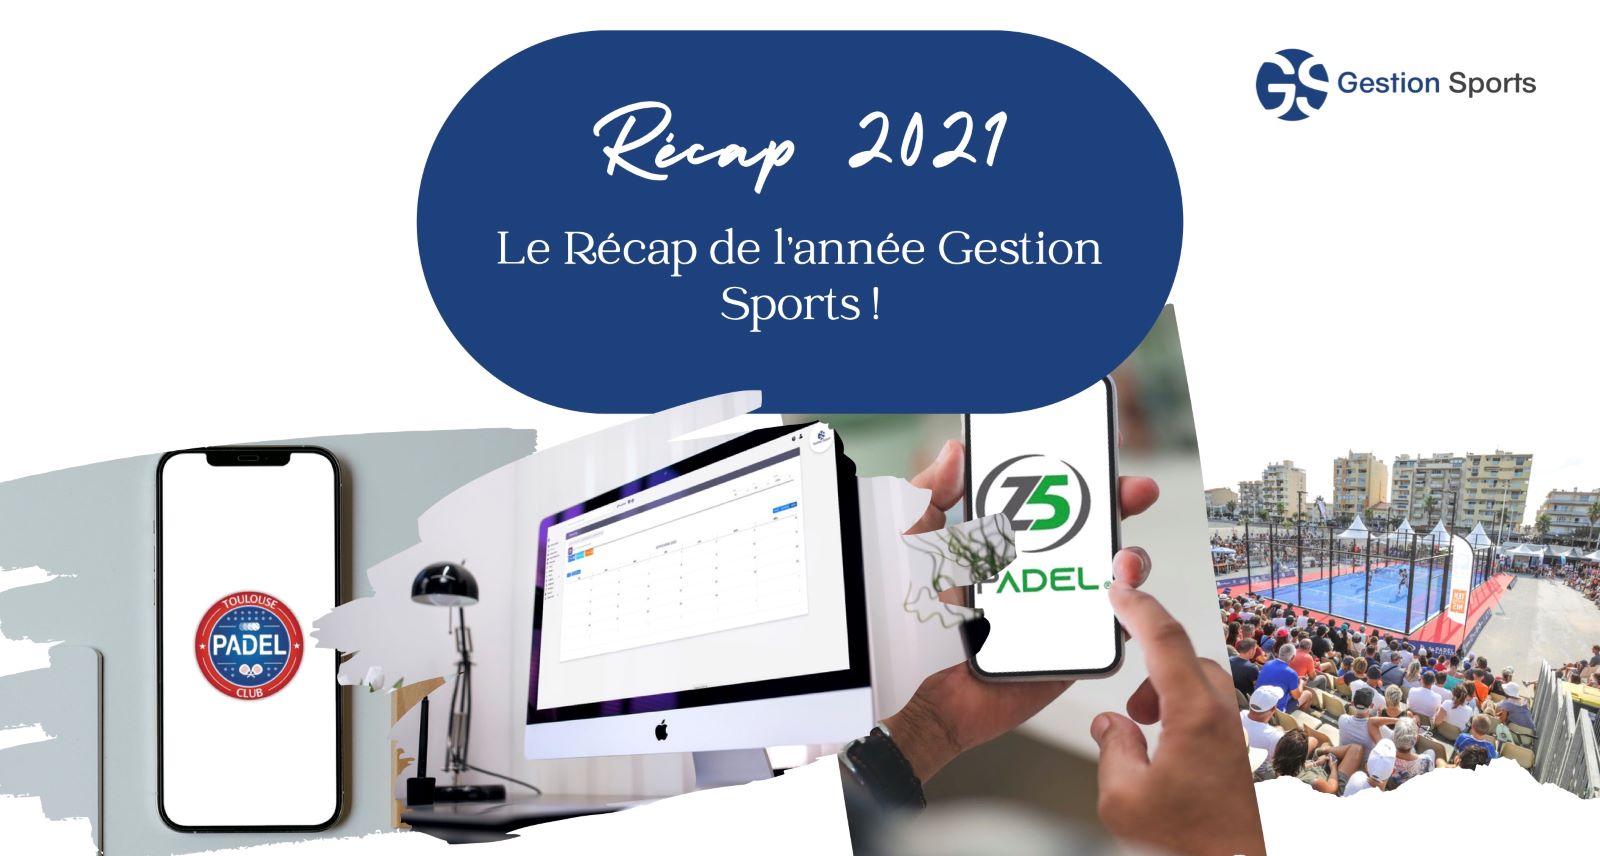 Gestion Sports: the Recap of the year 2021!